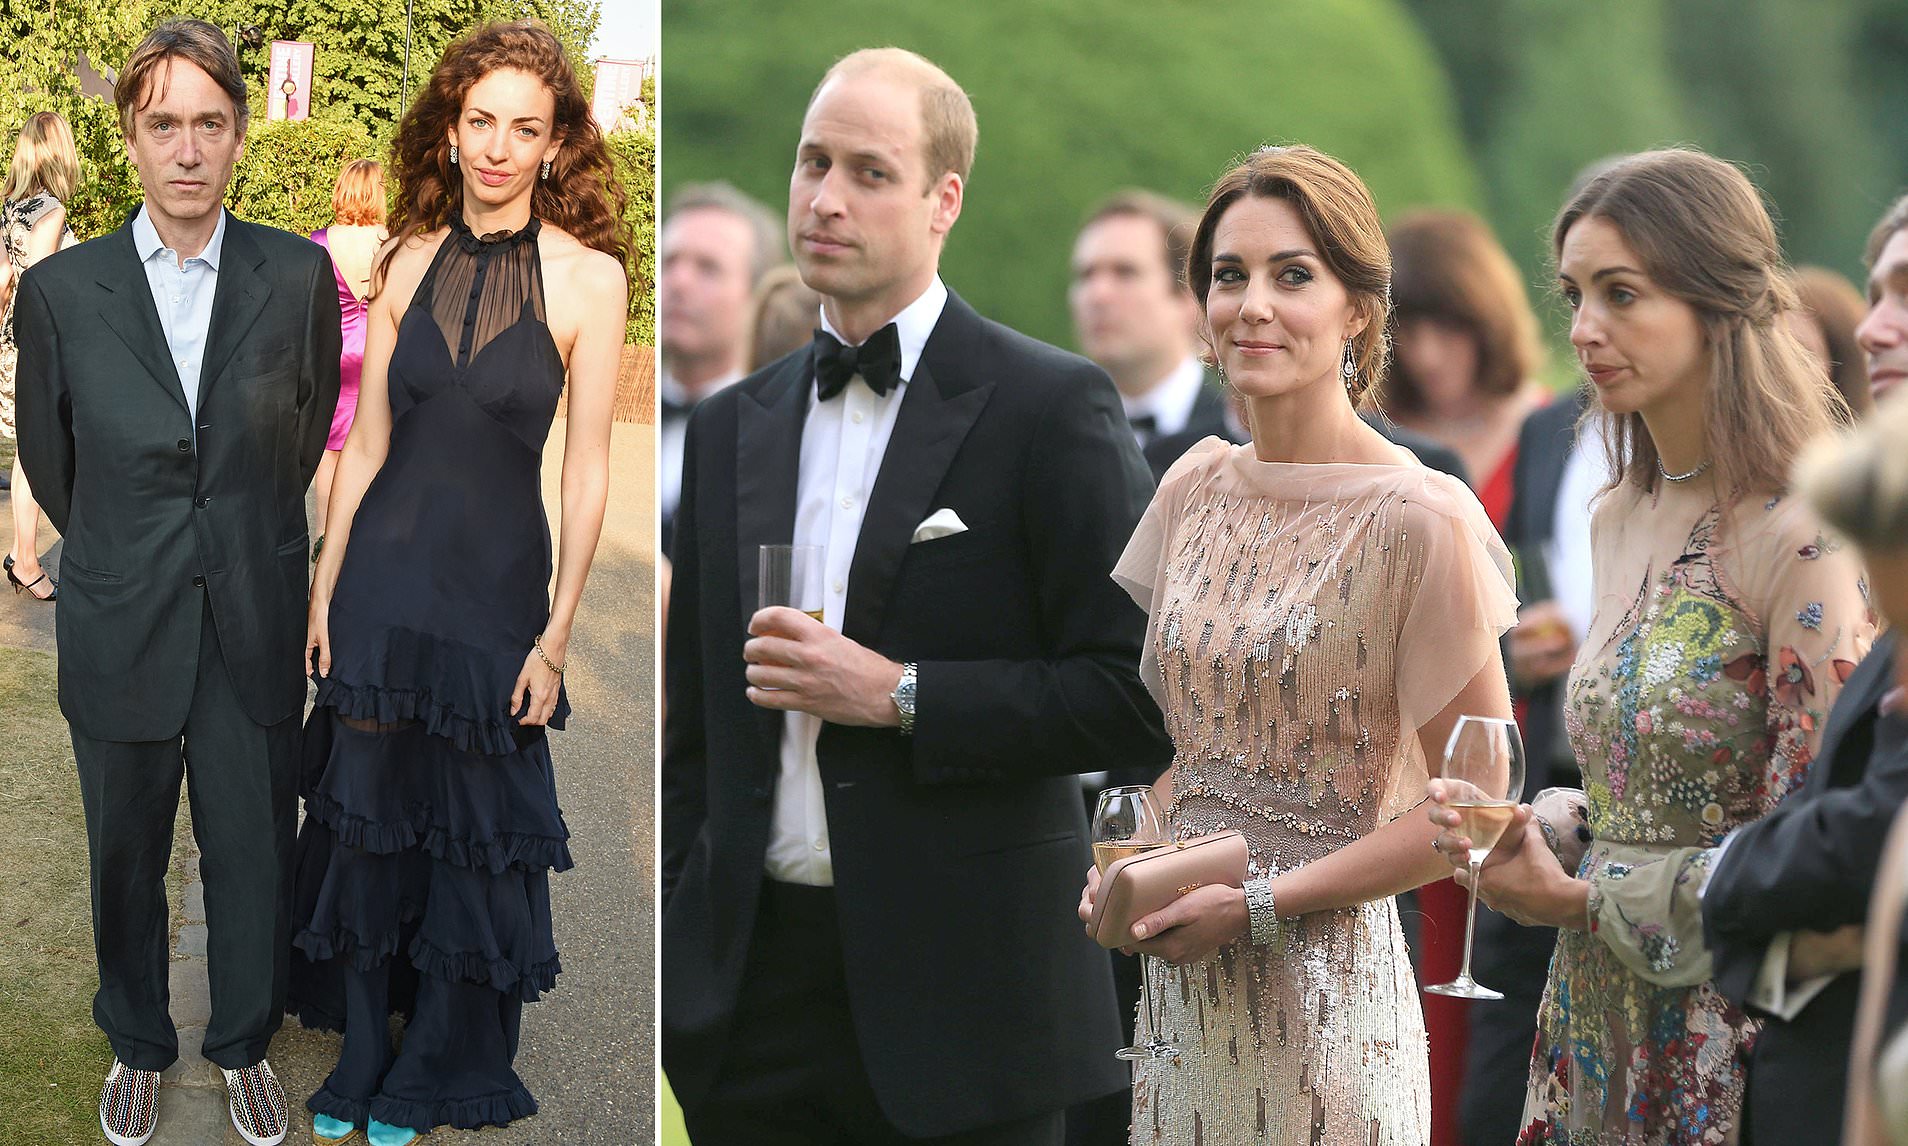 Did Prince William cheat on Kate Middleton with Rose Hanbury?  Are the rumors of an extramarital affair true?

+2023